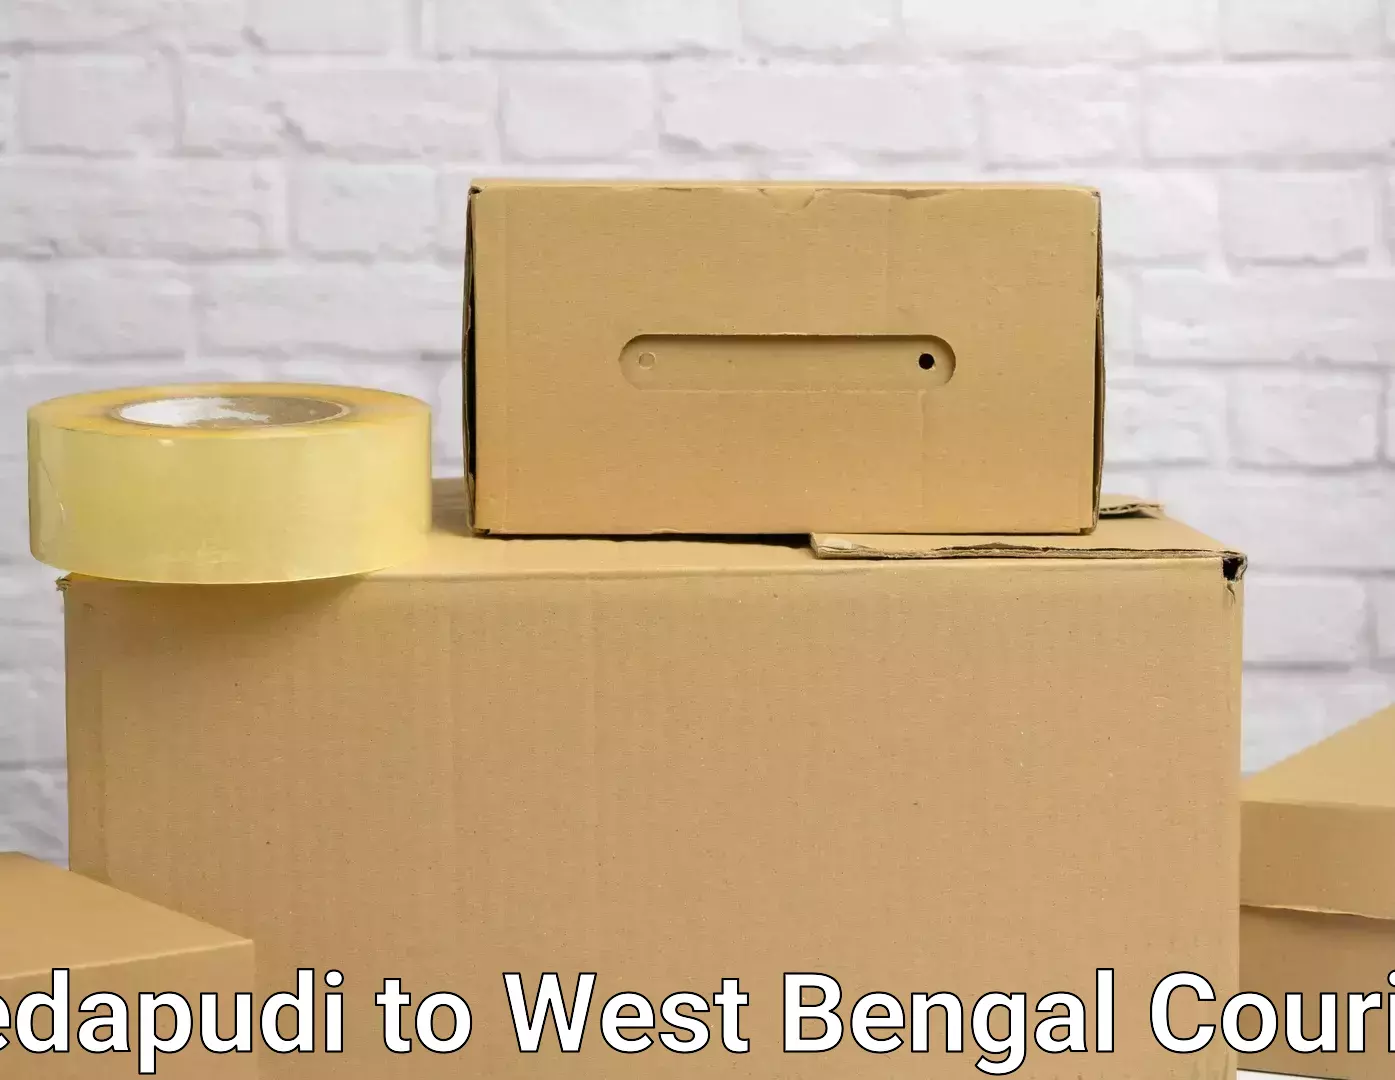 Nationwide furniture transport Pedapudi to West Bengal